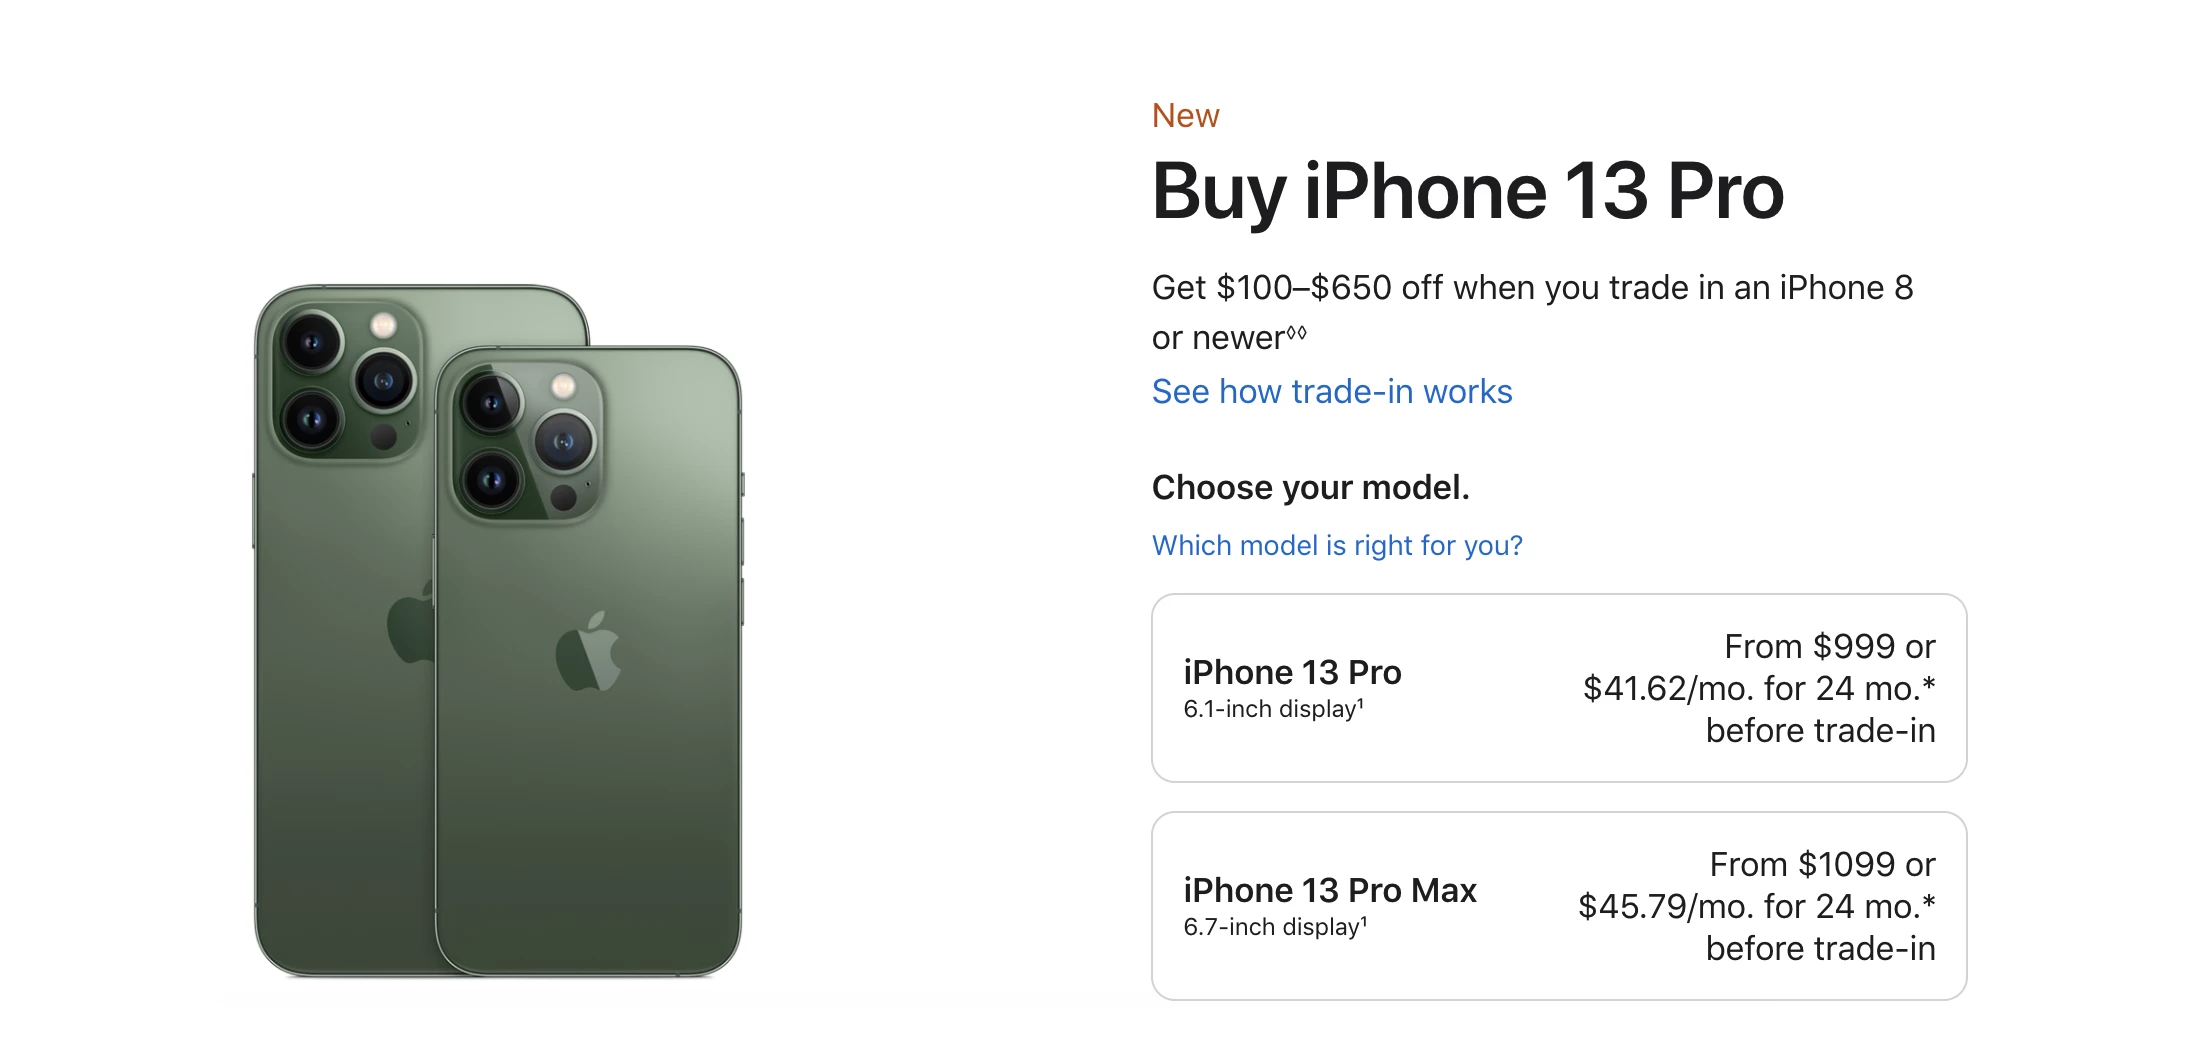 Upsell example from Apple.